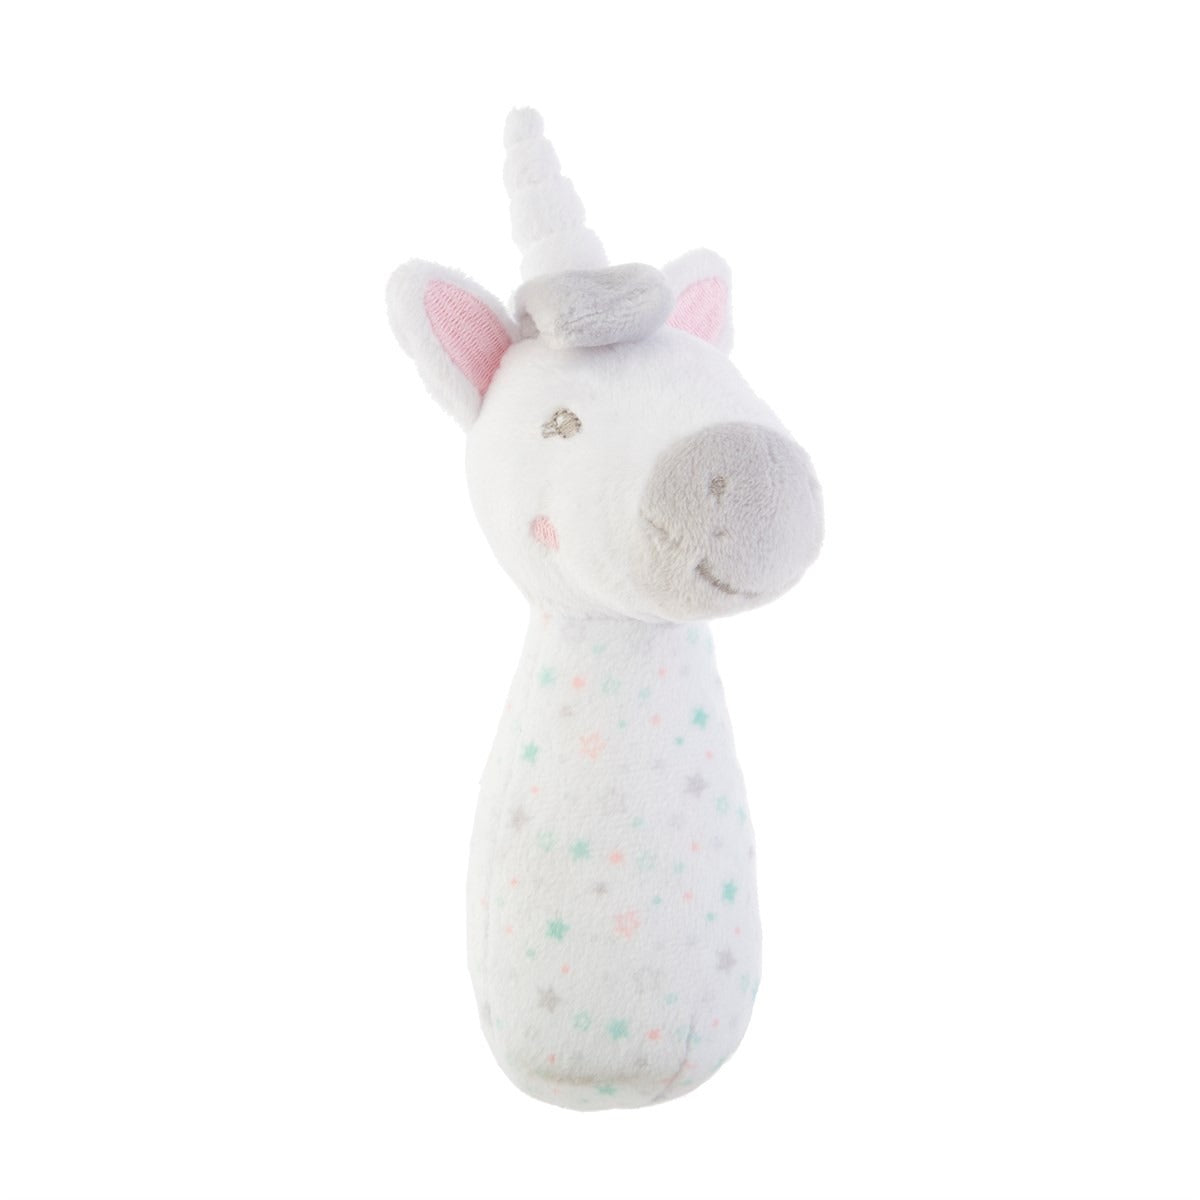 View Unicorn Baby Rattle information